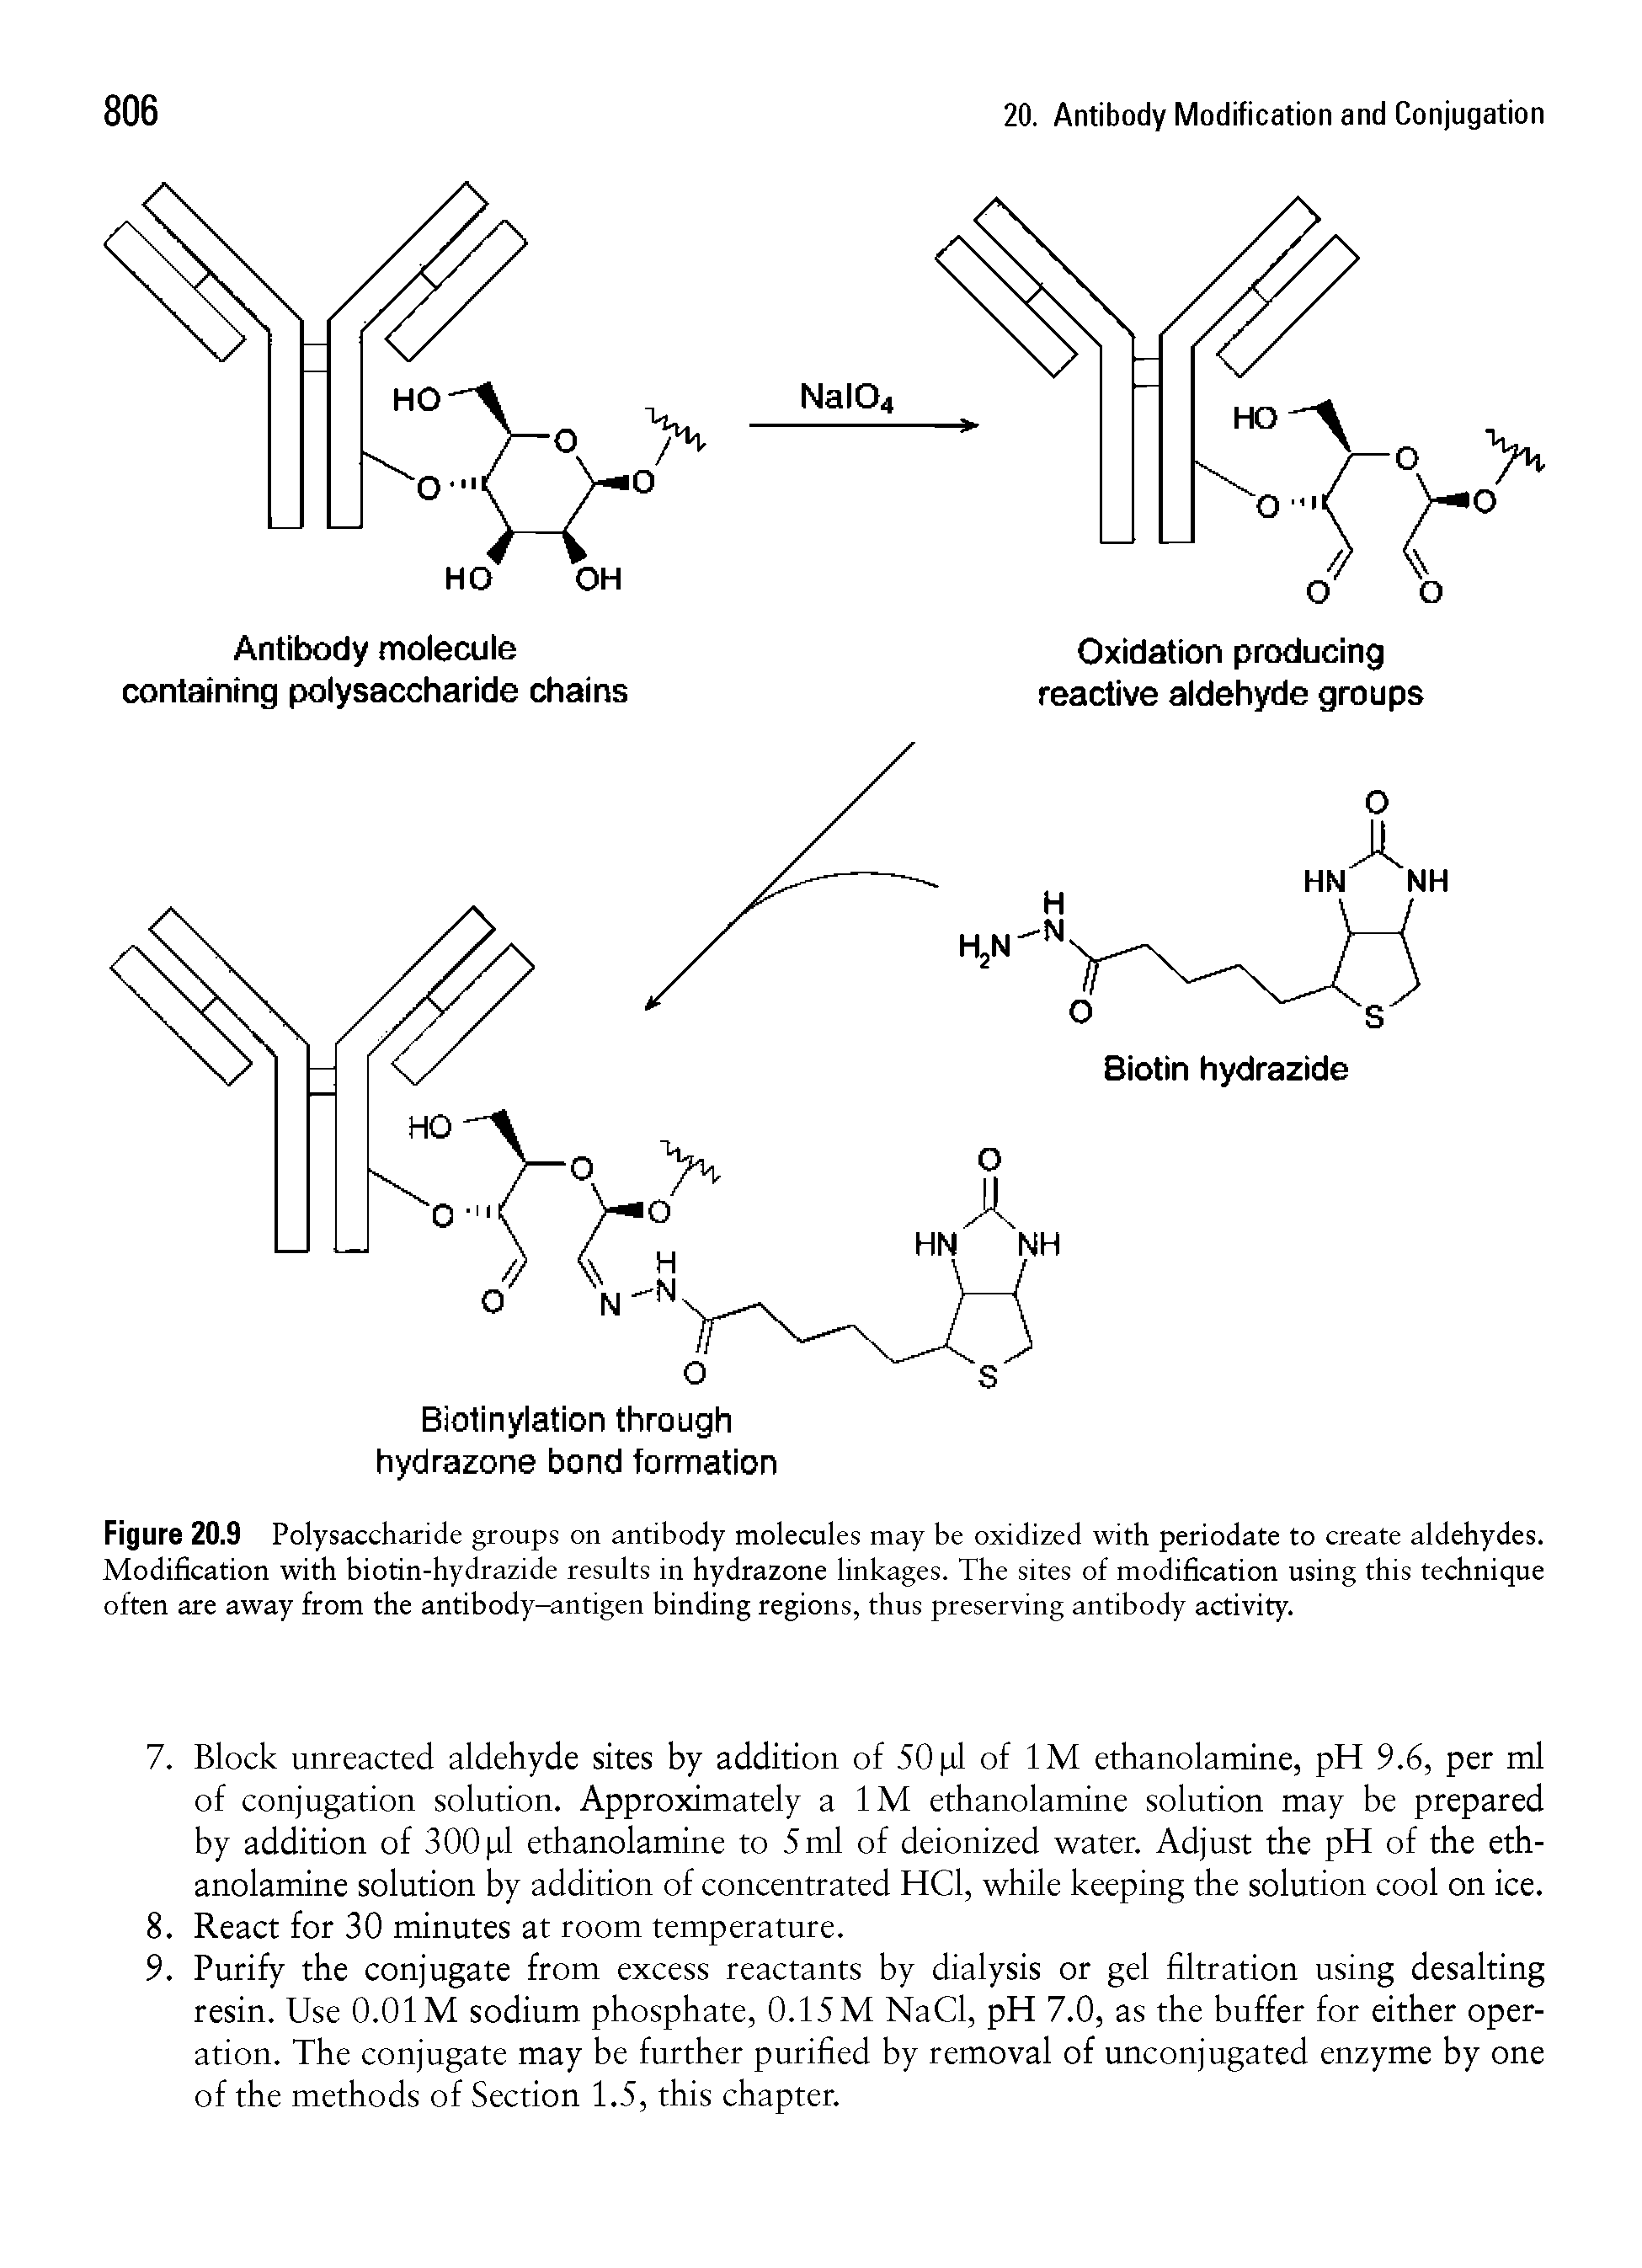 Figure 20.9 Polysaccharide groups on antibody molecules may be oxidized with periodate to create aldehydes. Modification with biotin-hydrazide results in hydrazone linkages. The sites of modification using this technique often are away from the antibody-antigen binding regions, thus preserving antibody activity.